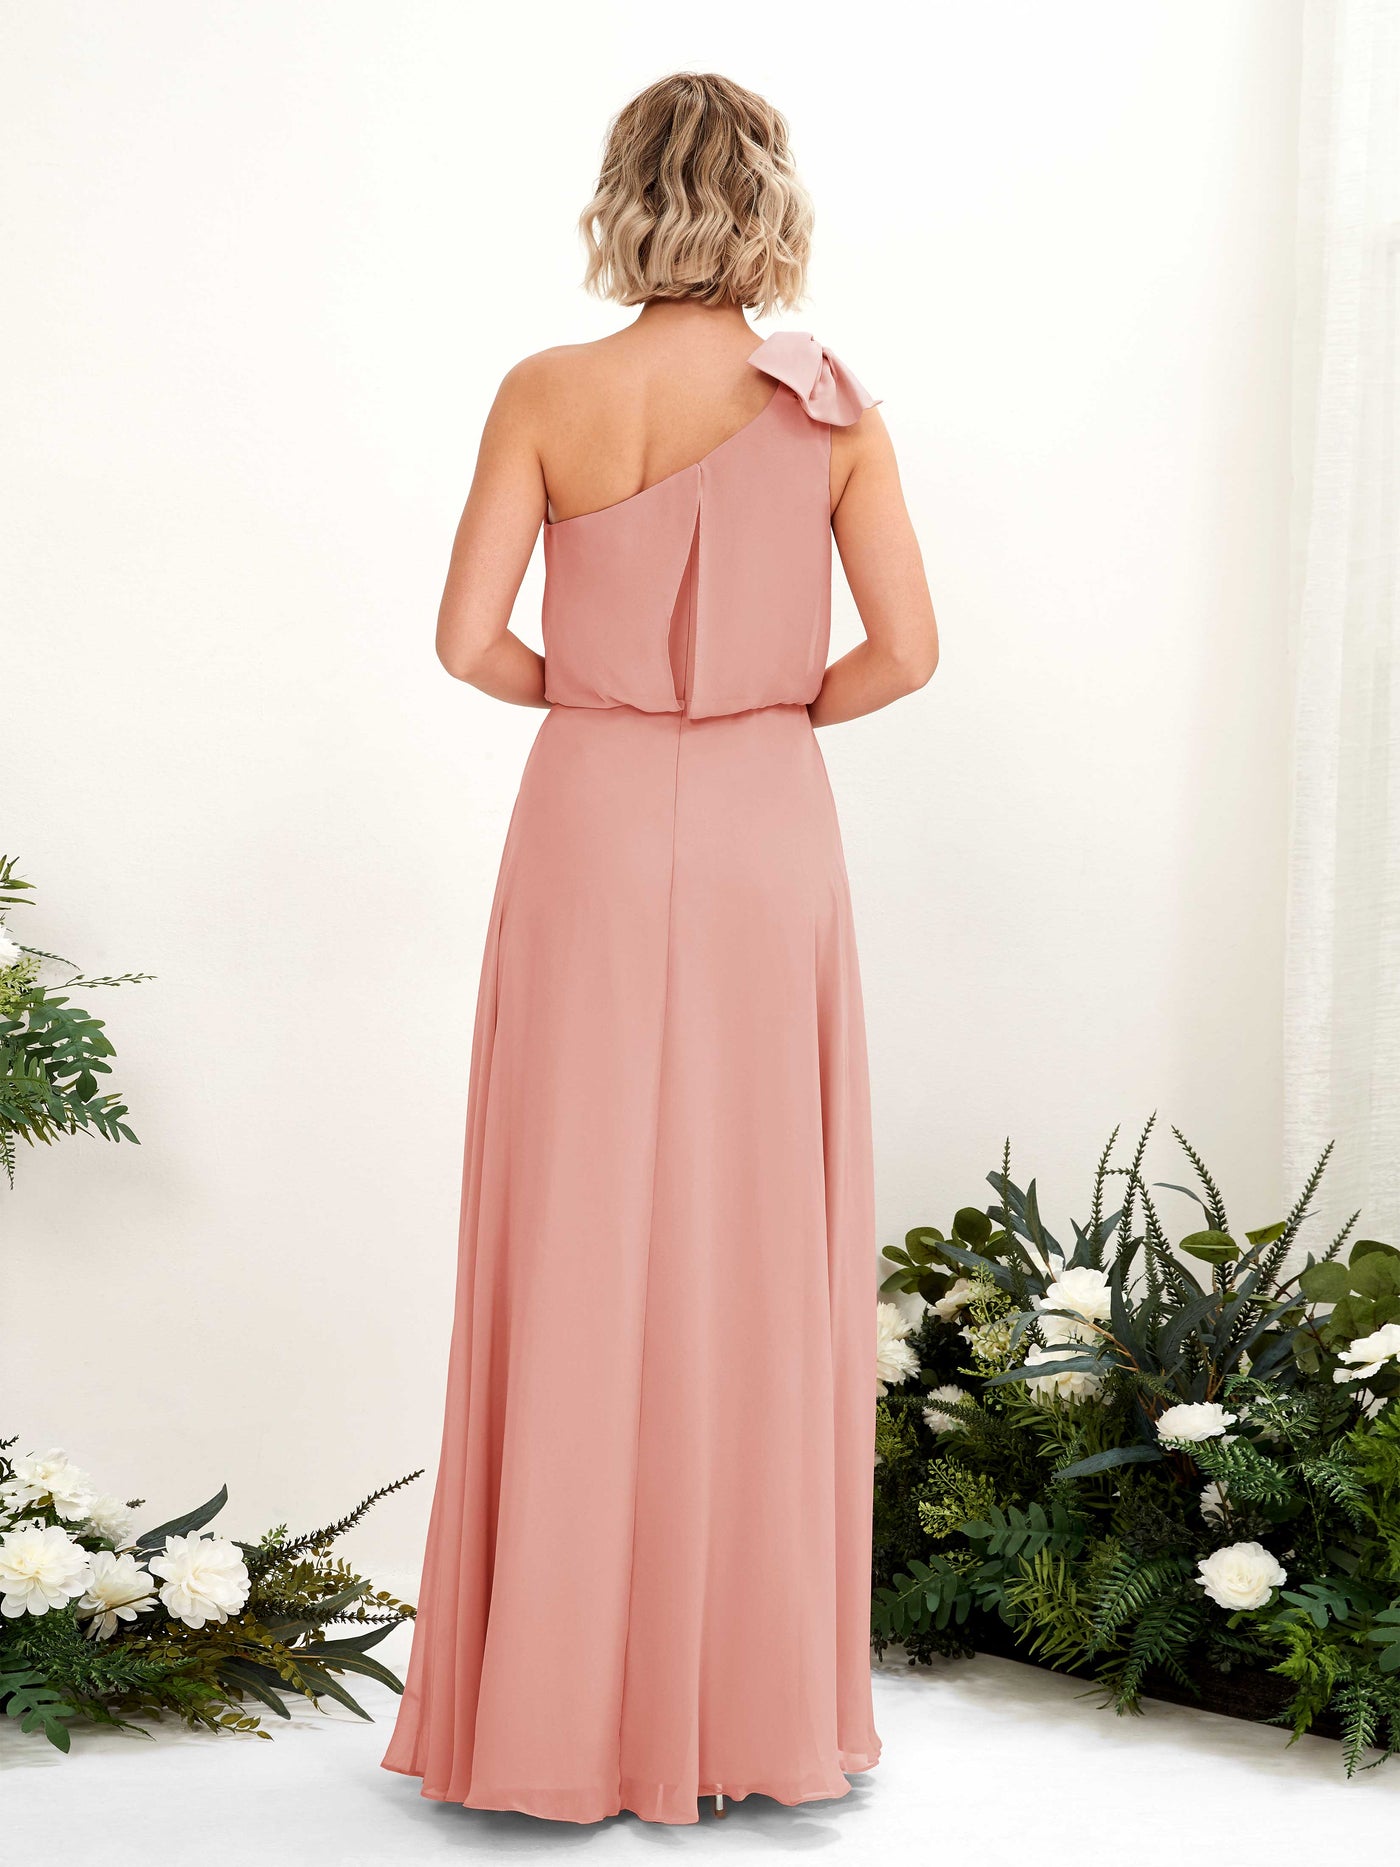 Champagne Rose Bridesmaid Dresses Bridesmaid Dress A-line Chiffon One Shoulder Full Length Sleeveless Wedding Party Dress (81225506)#color_champagne-rose